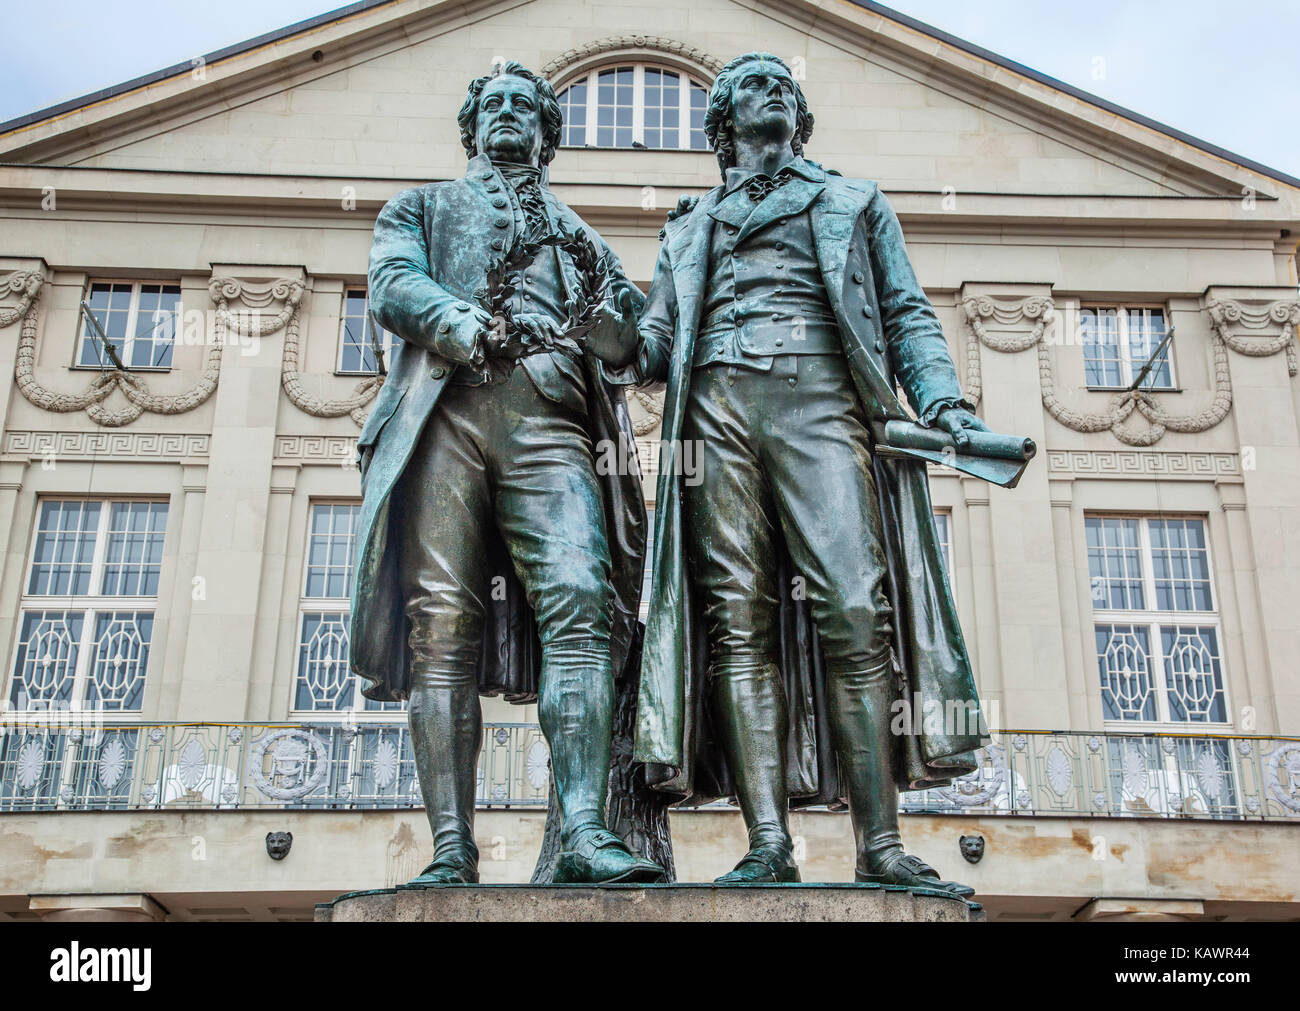 Germany, Thuringia, Weimar, Goethe-Schiller Monument, a bronce double statue of the two most revered figures in German literature by the German sculpt Stock Photo